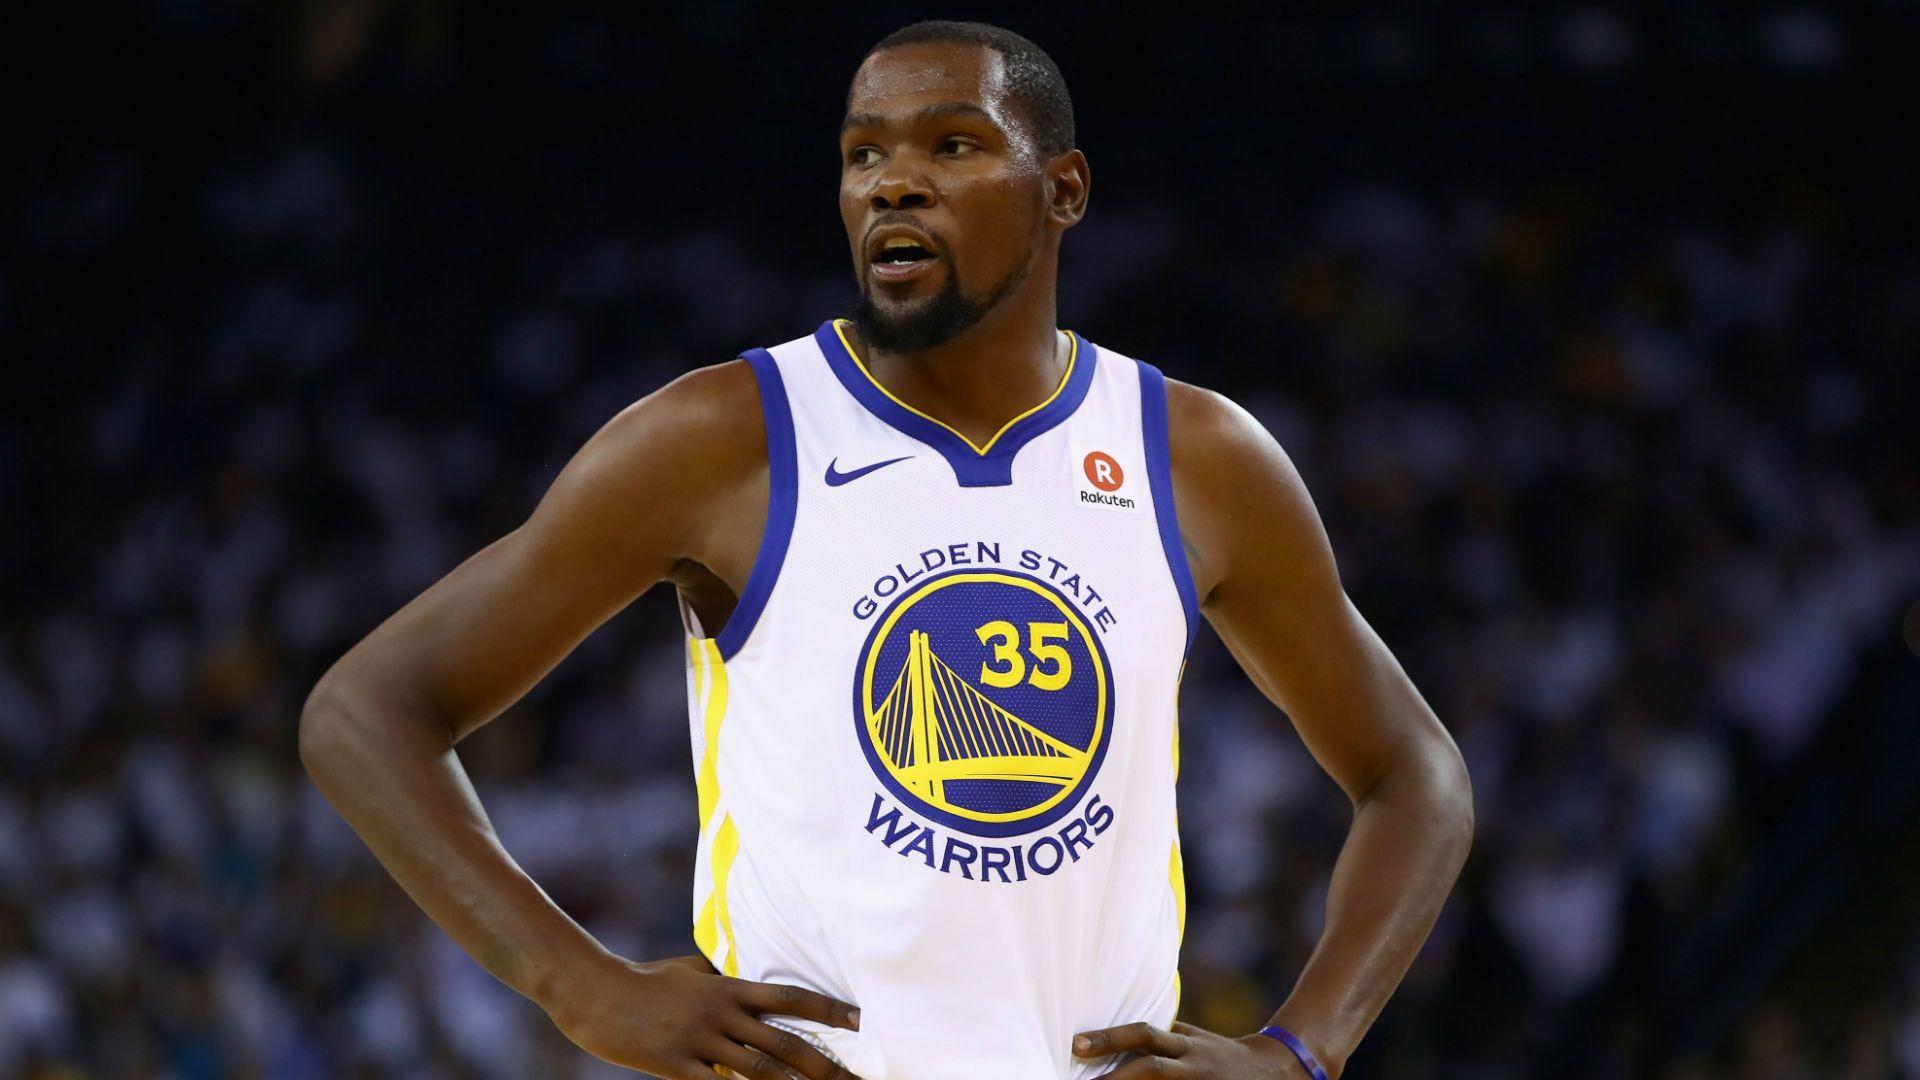 Warriors star Kevin Durant on loyalty in NBA: 'Ain't no such thing